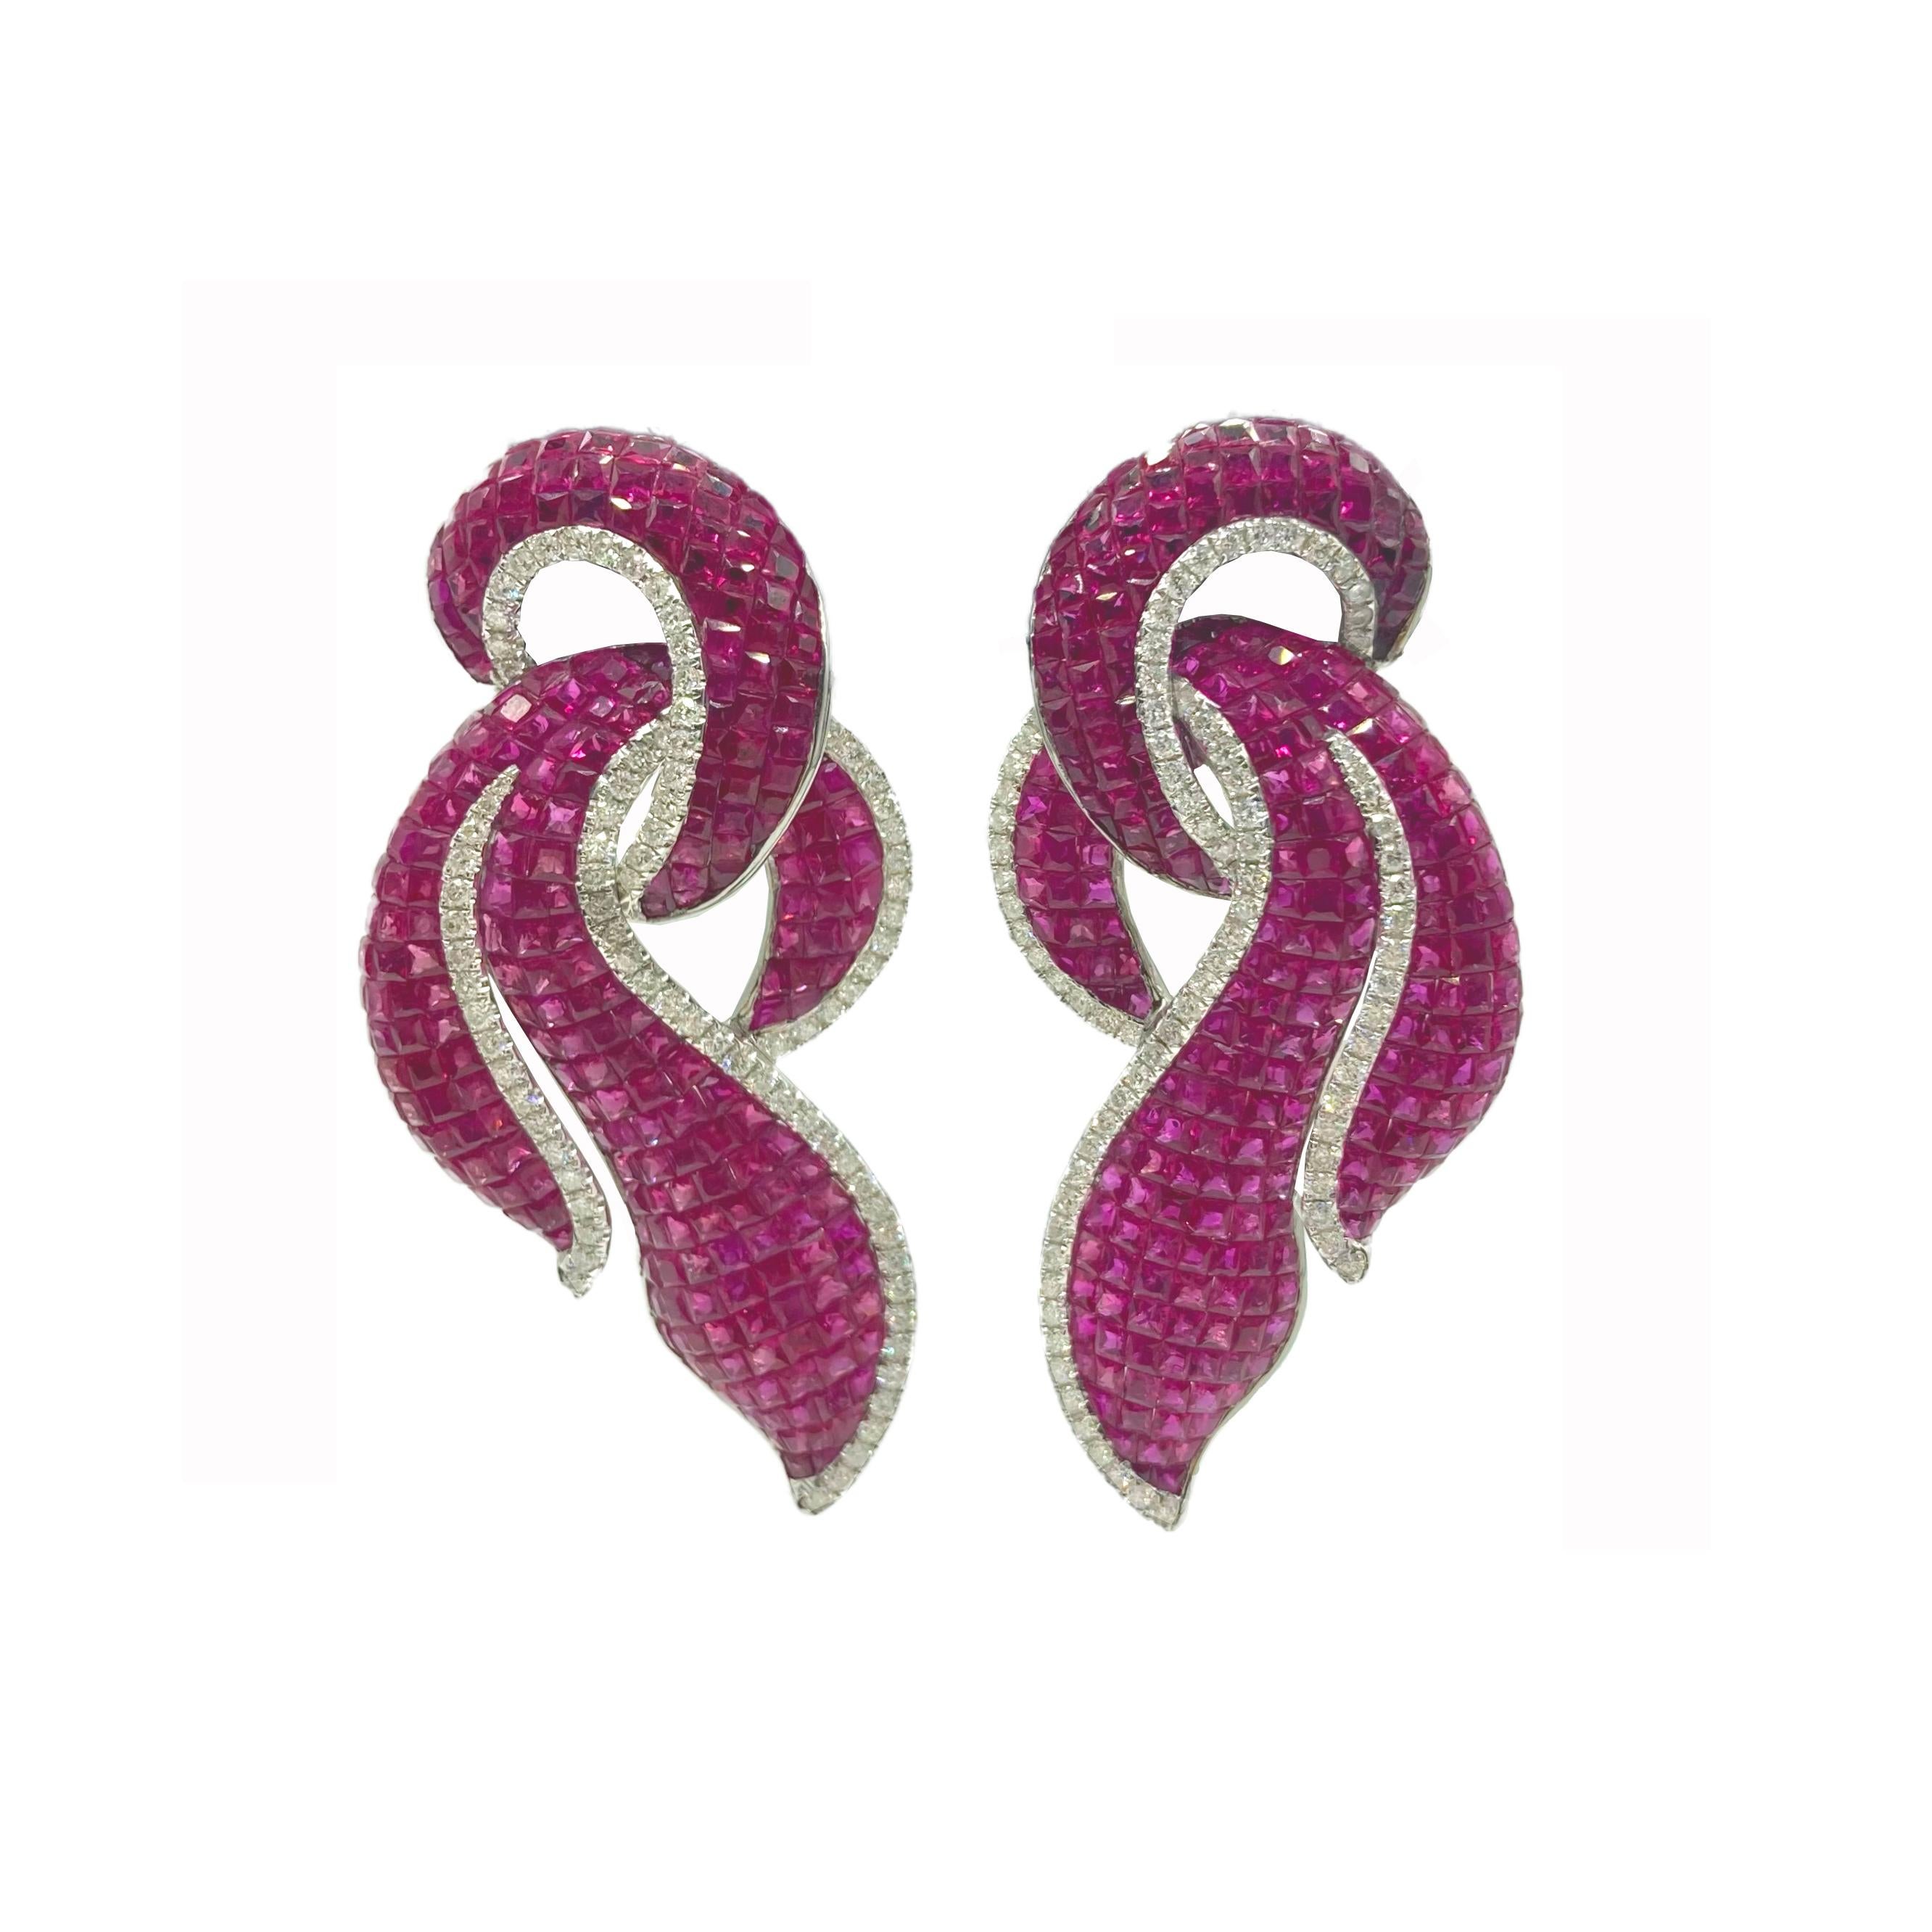 A glamorous pair of invisible set ruby and diamond earrings in 18 karat white gold.